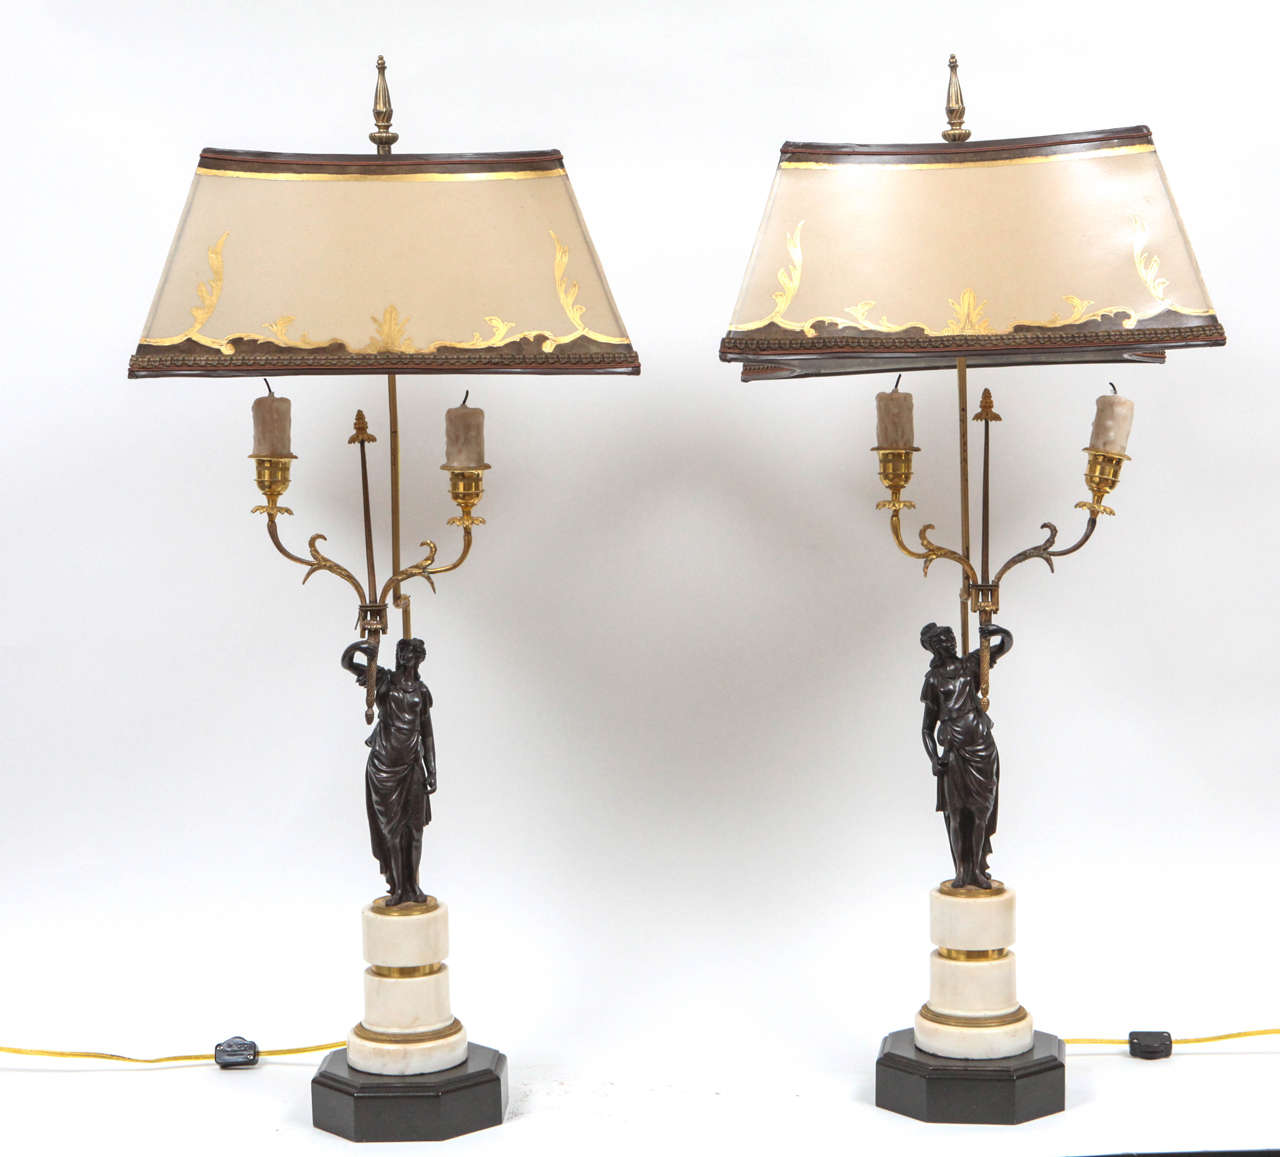 Pair of 19th century French marble and bronze candlesticks converted to lamps. They are very fine and French mounted. The shades are included and are handmade of parchment paper. They are hand gilded and decorated. The lamps have been newly wired.